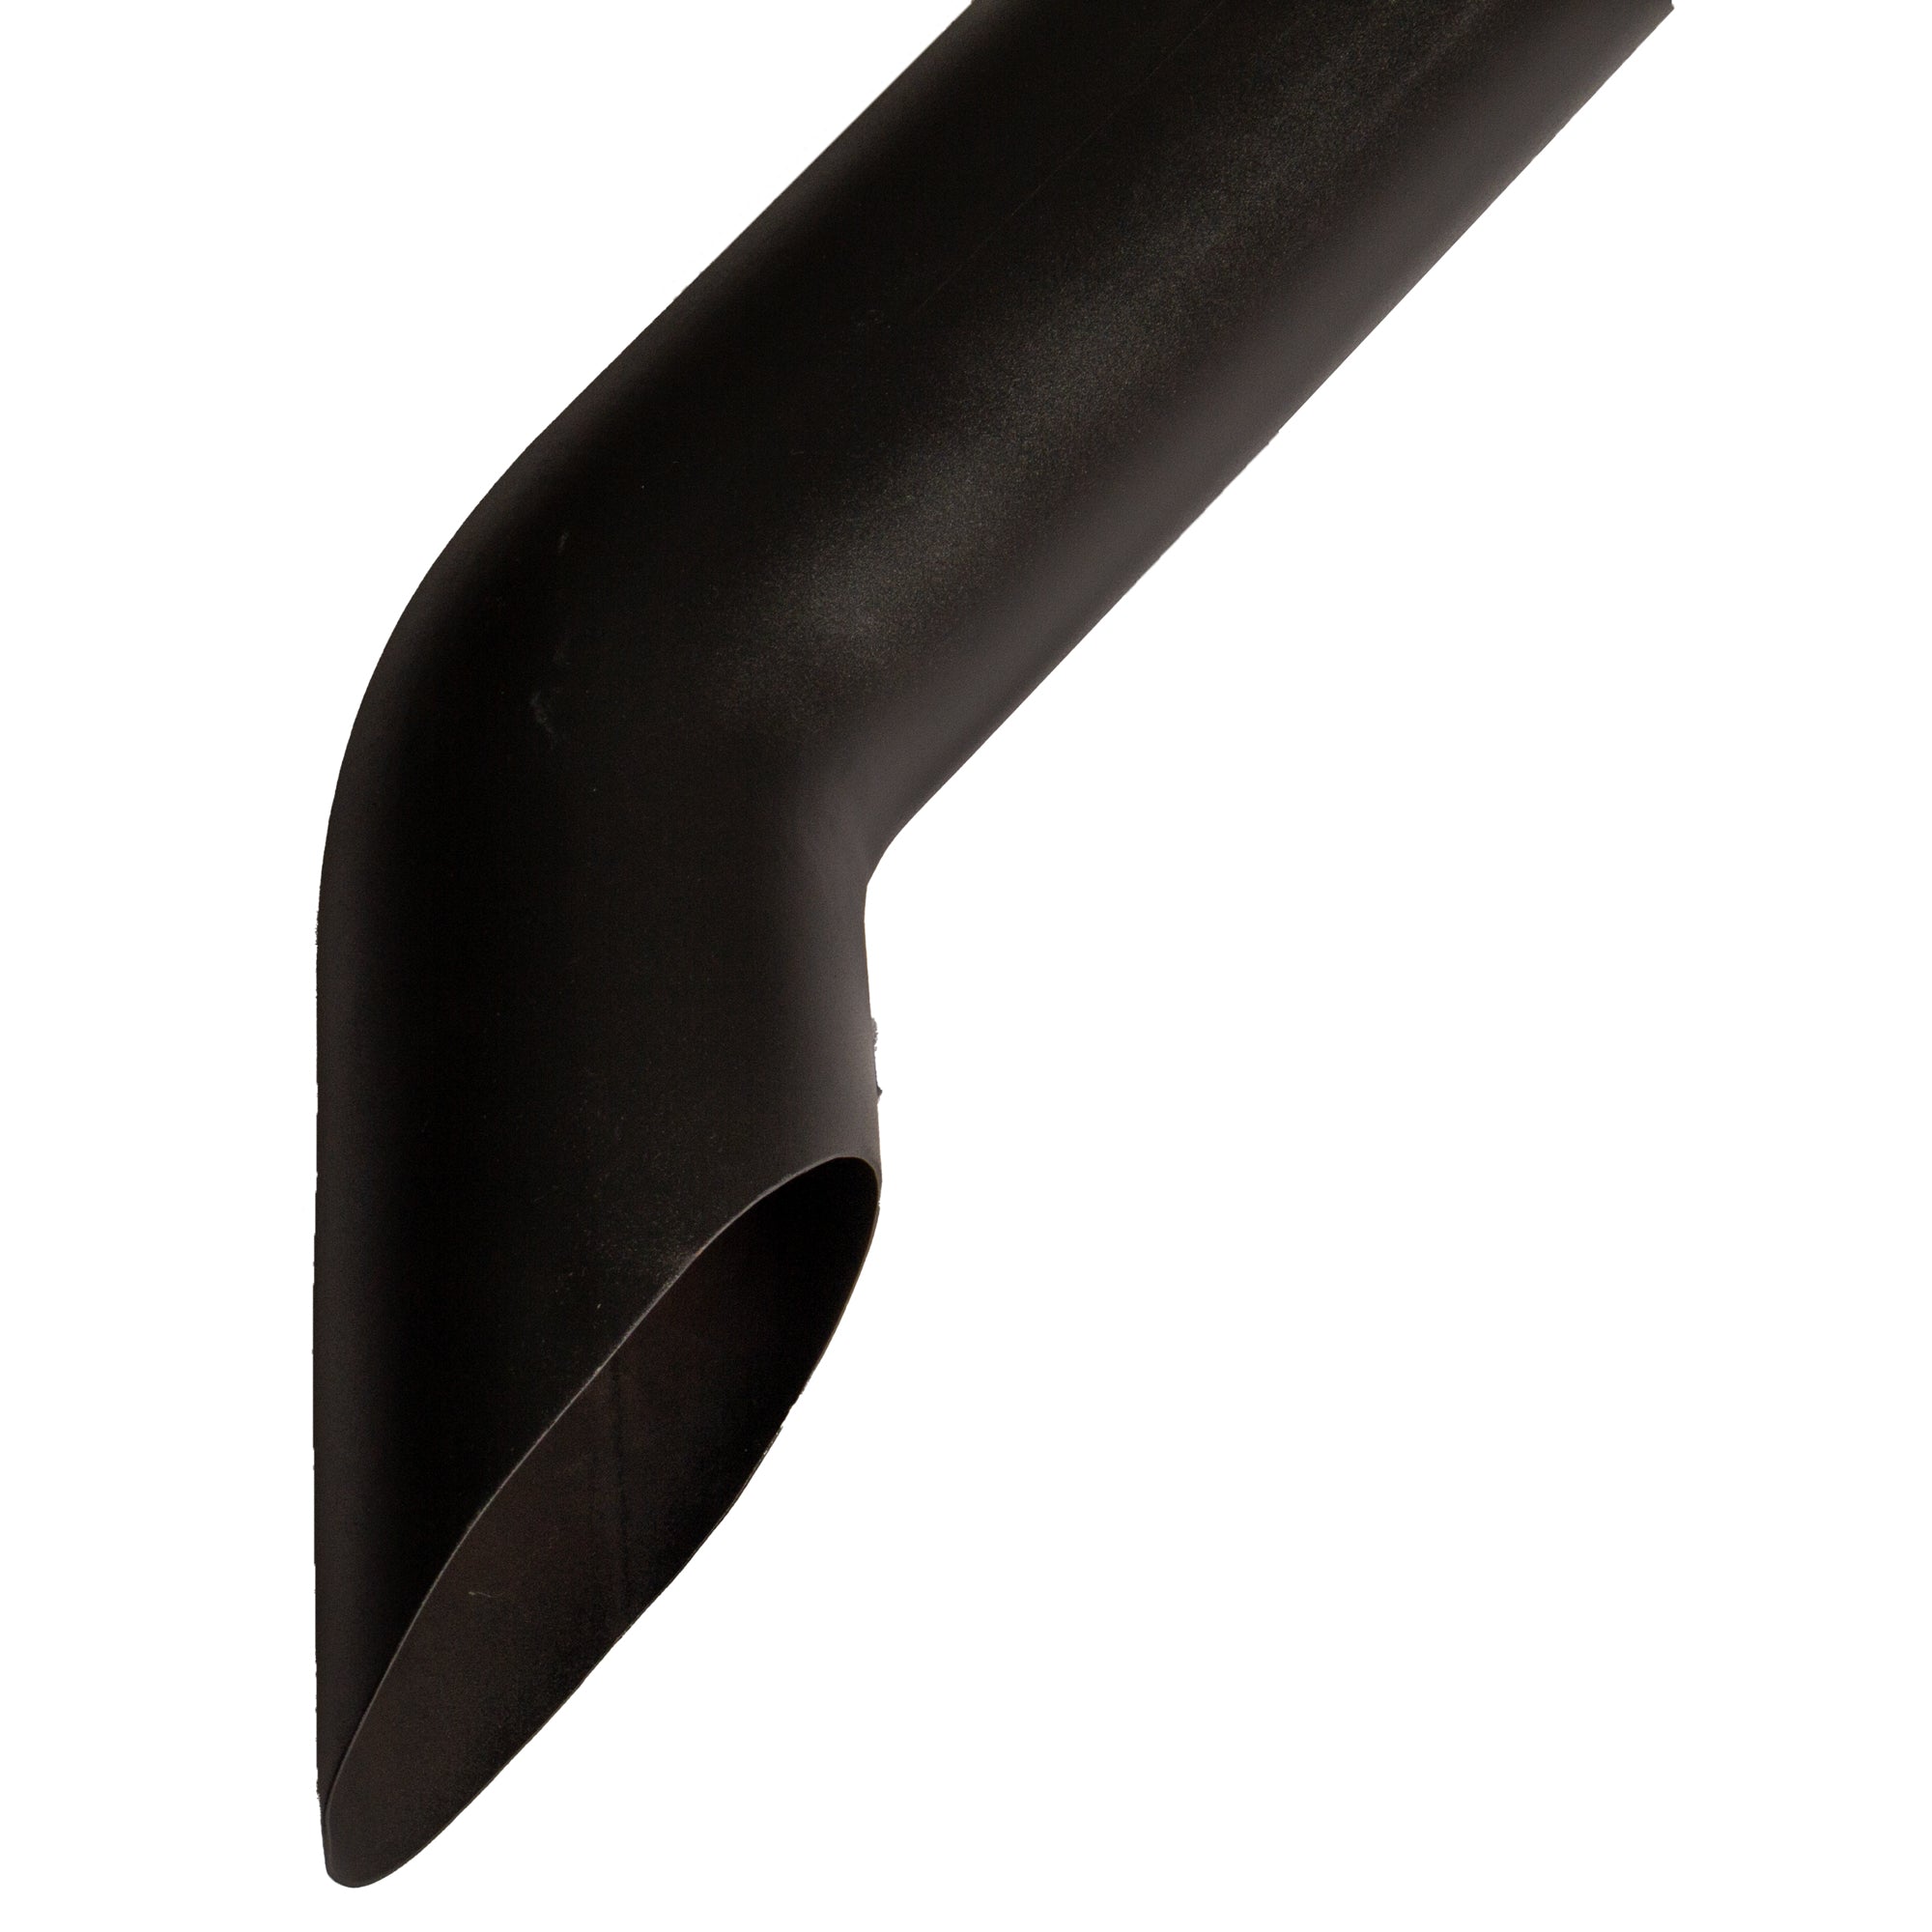 Exhaust Pipe Stack Replacement UNIVERSAL - 5" x 96" Curved Black